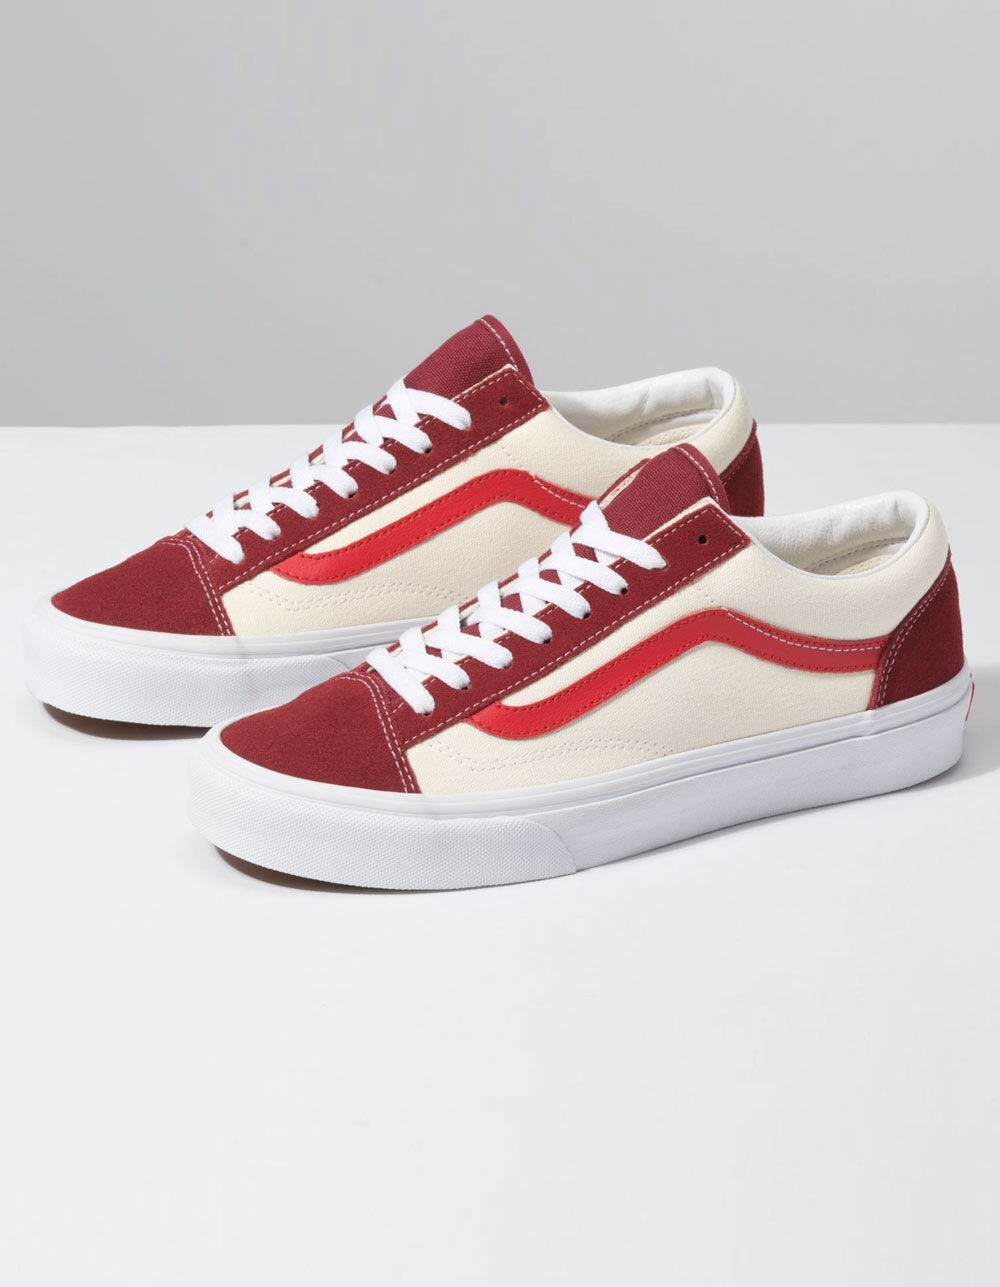 VANS Retro Sport Style 36 Biking Red & Poinsettia Shoes image number 1